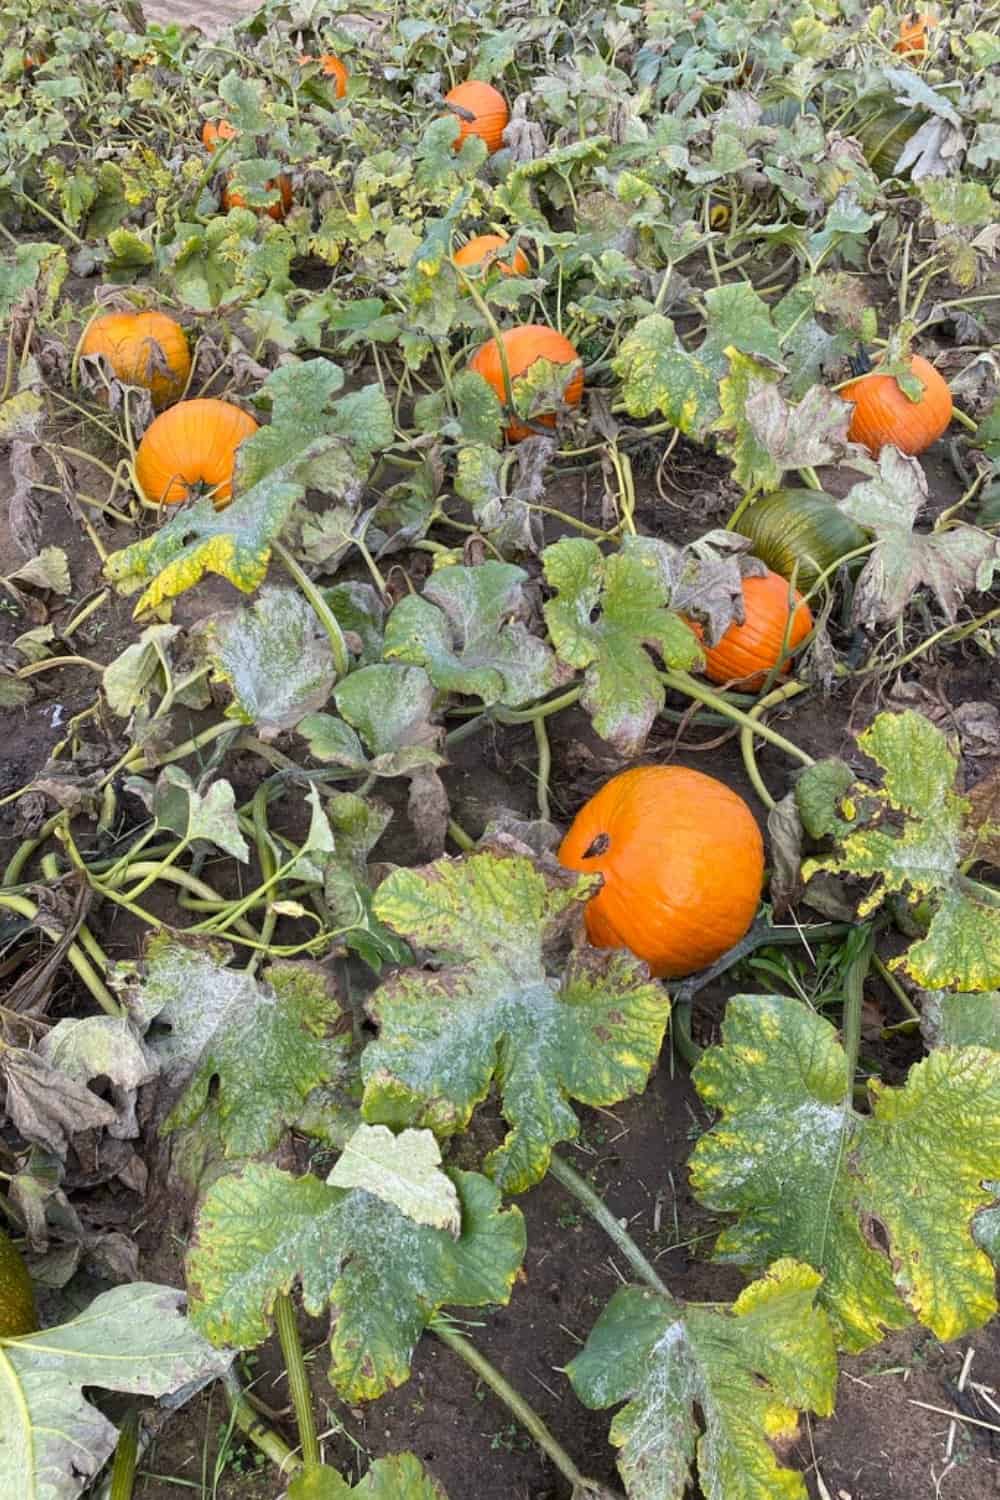 Orange pumpkins in a field with green leaves